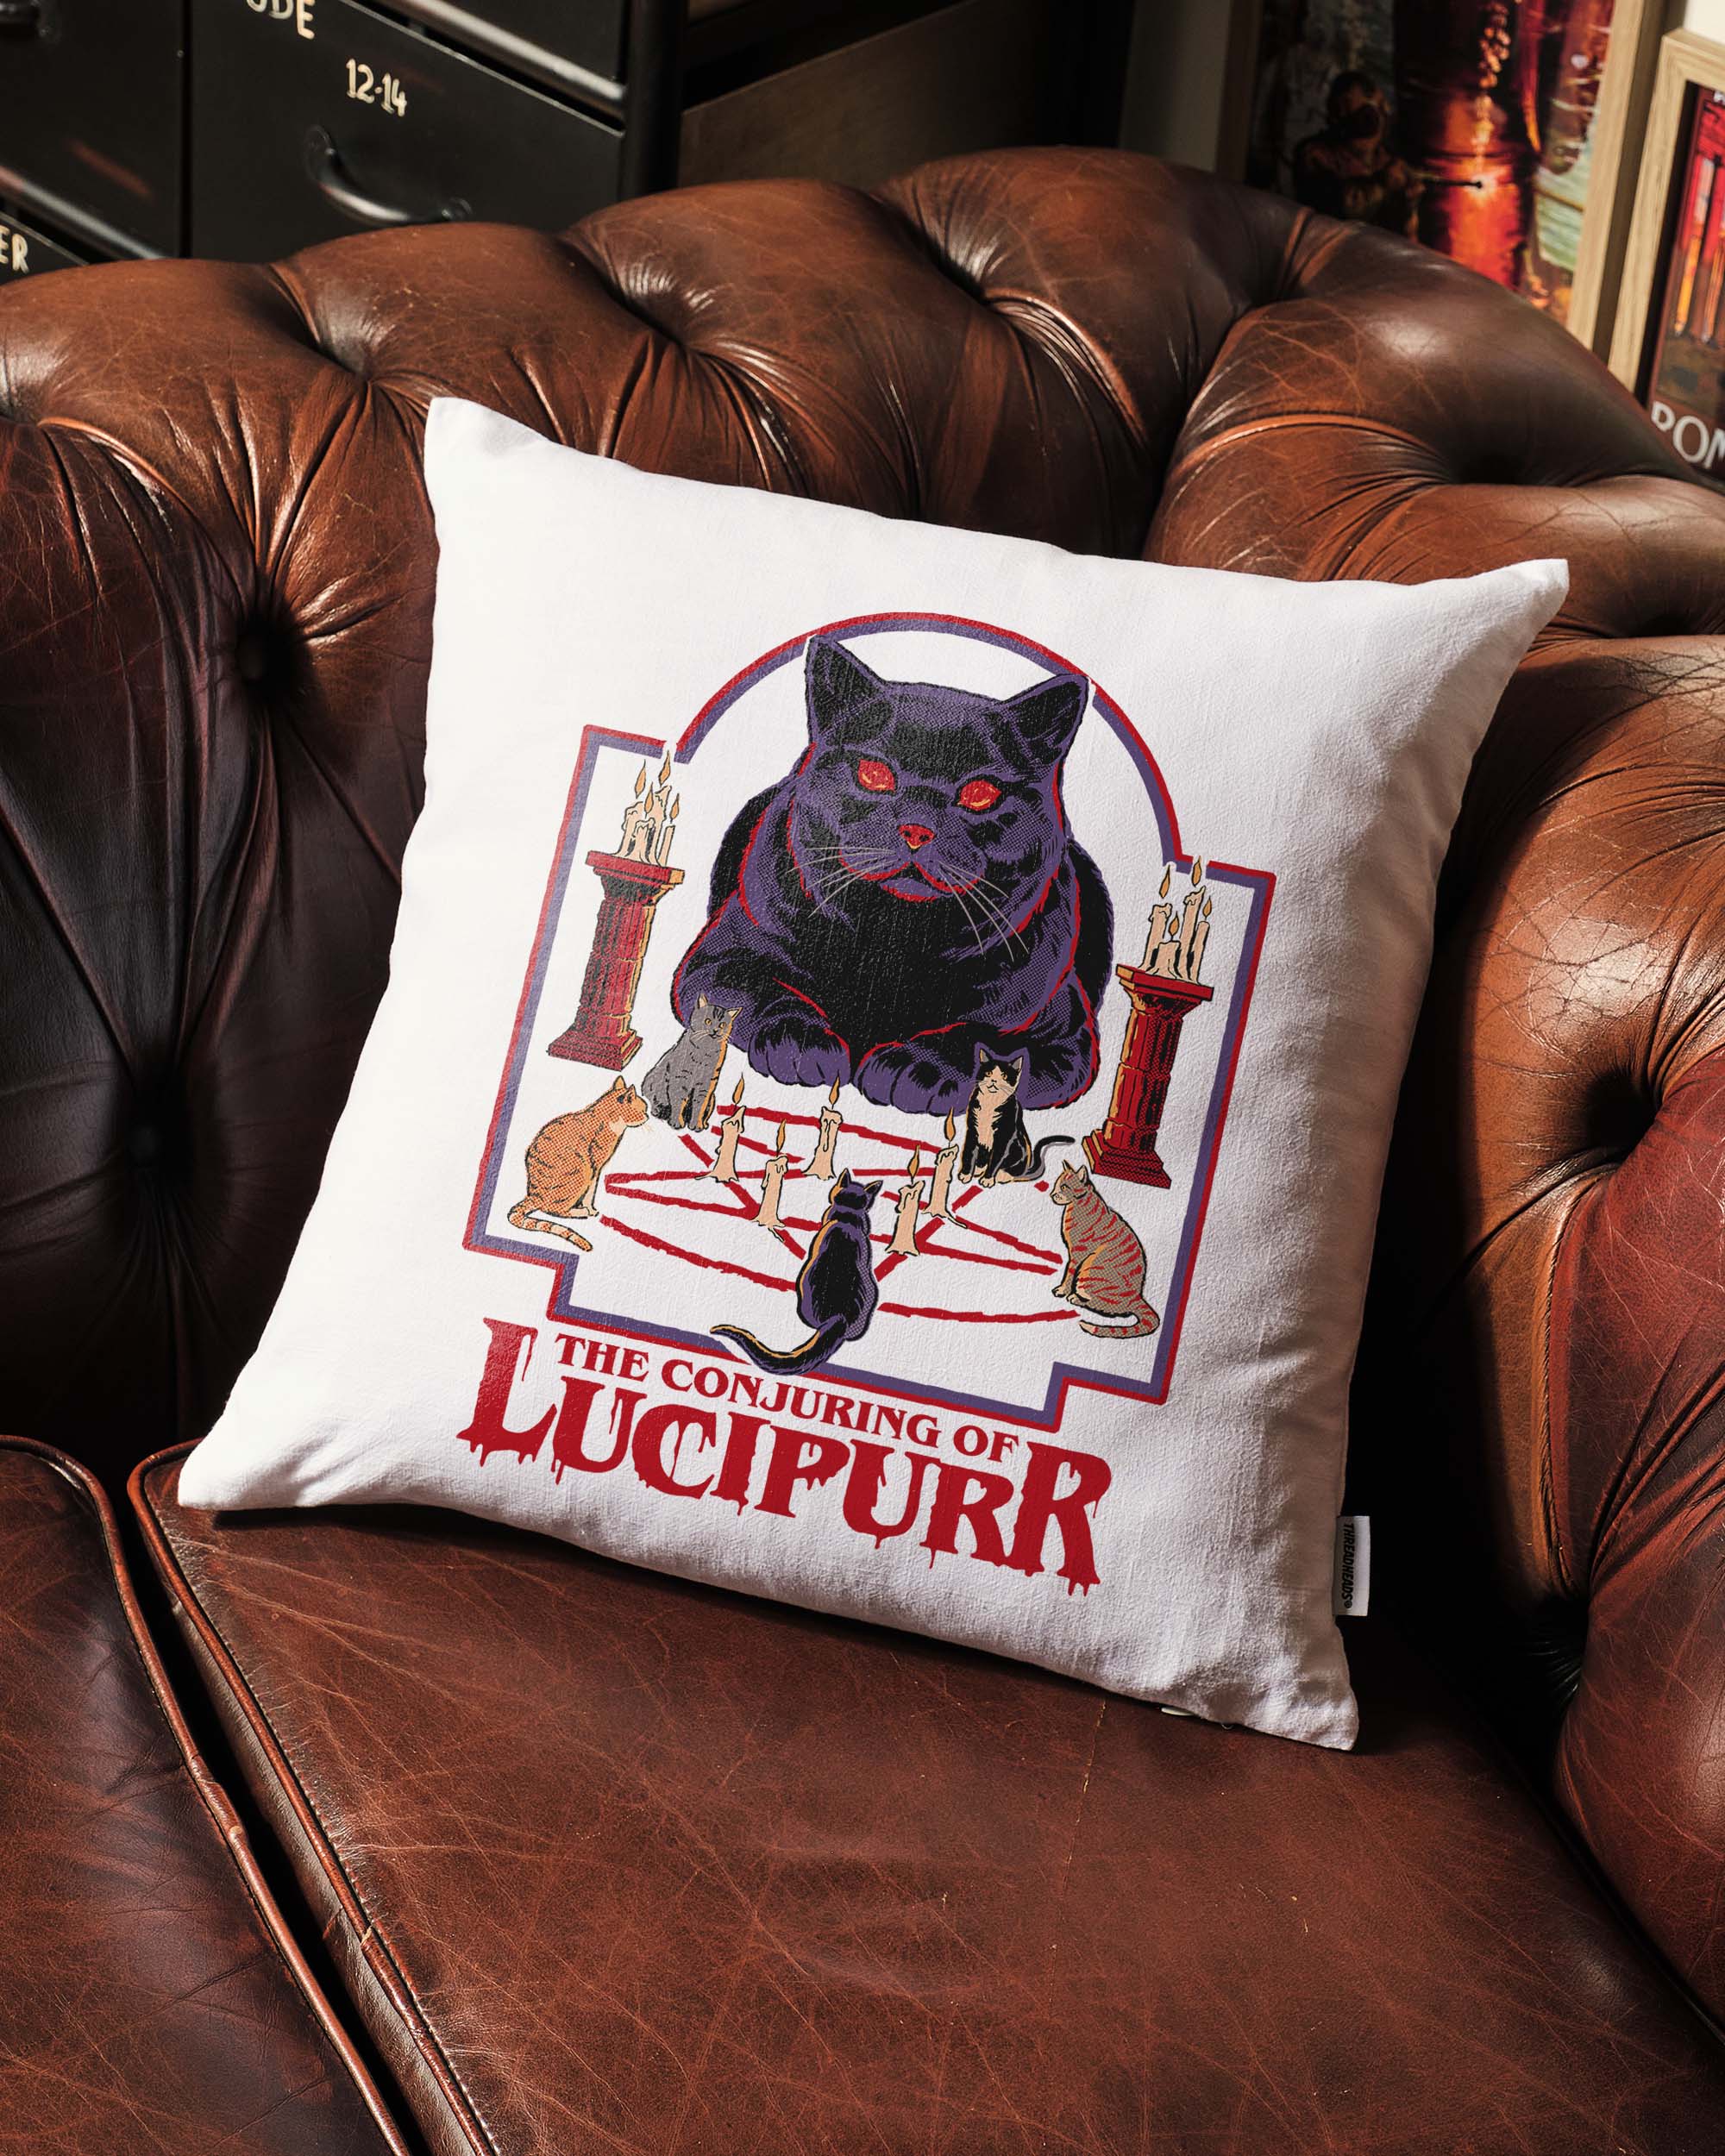 The Conjuring of Lucipurr Cushion